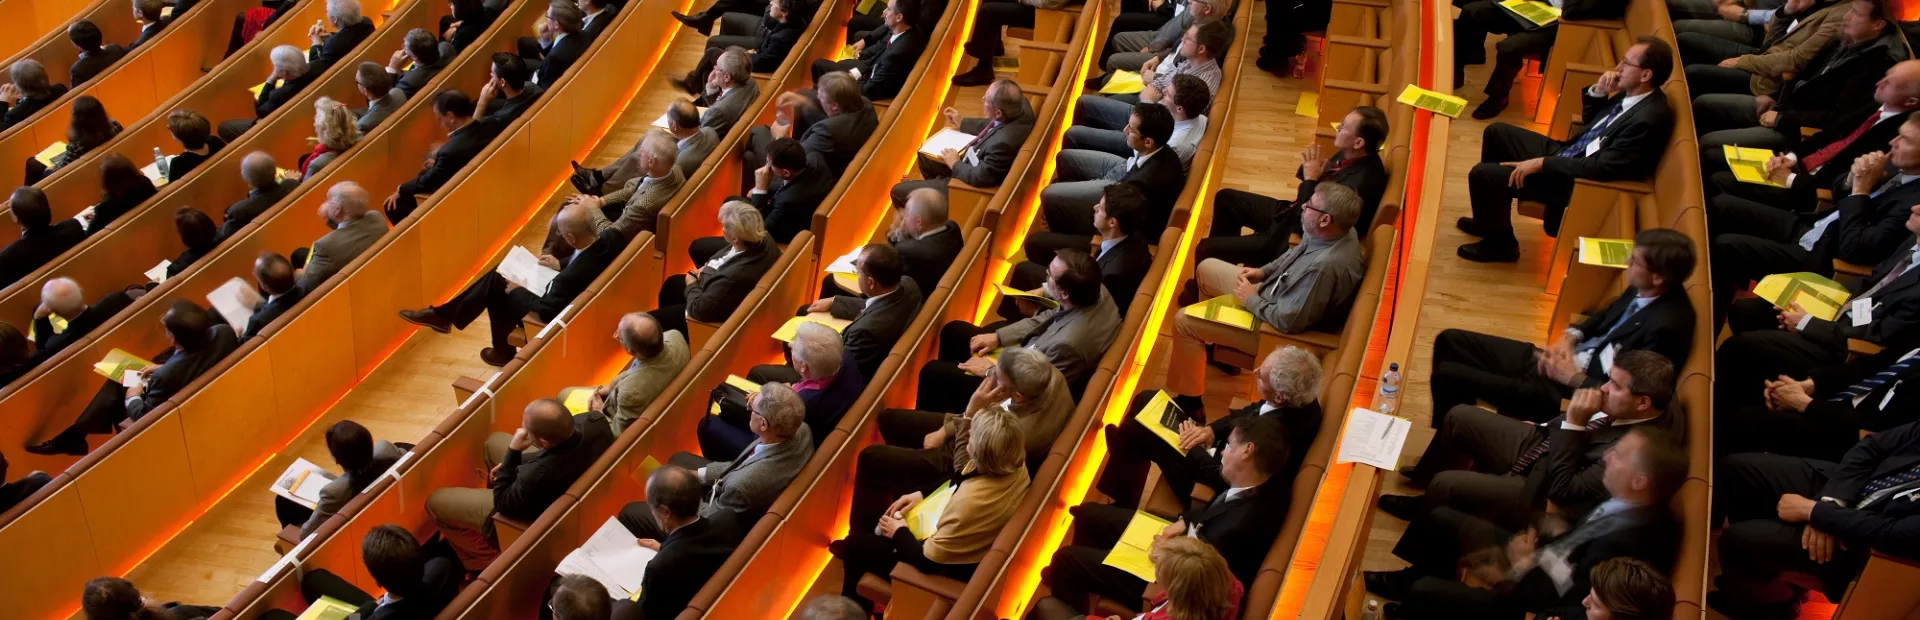 A crowd of seated people at a speaker event inside an auditorium